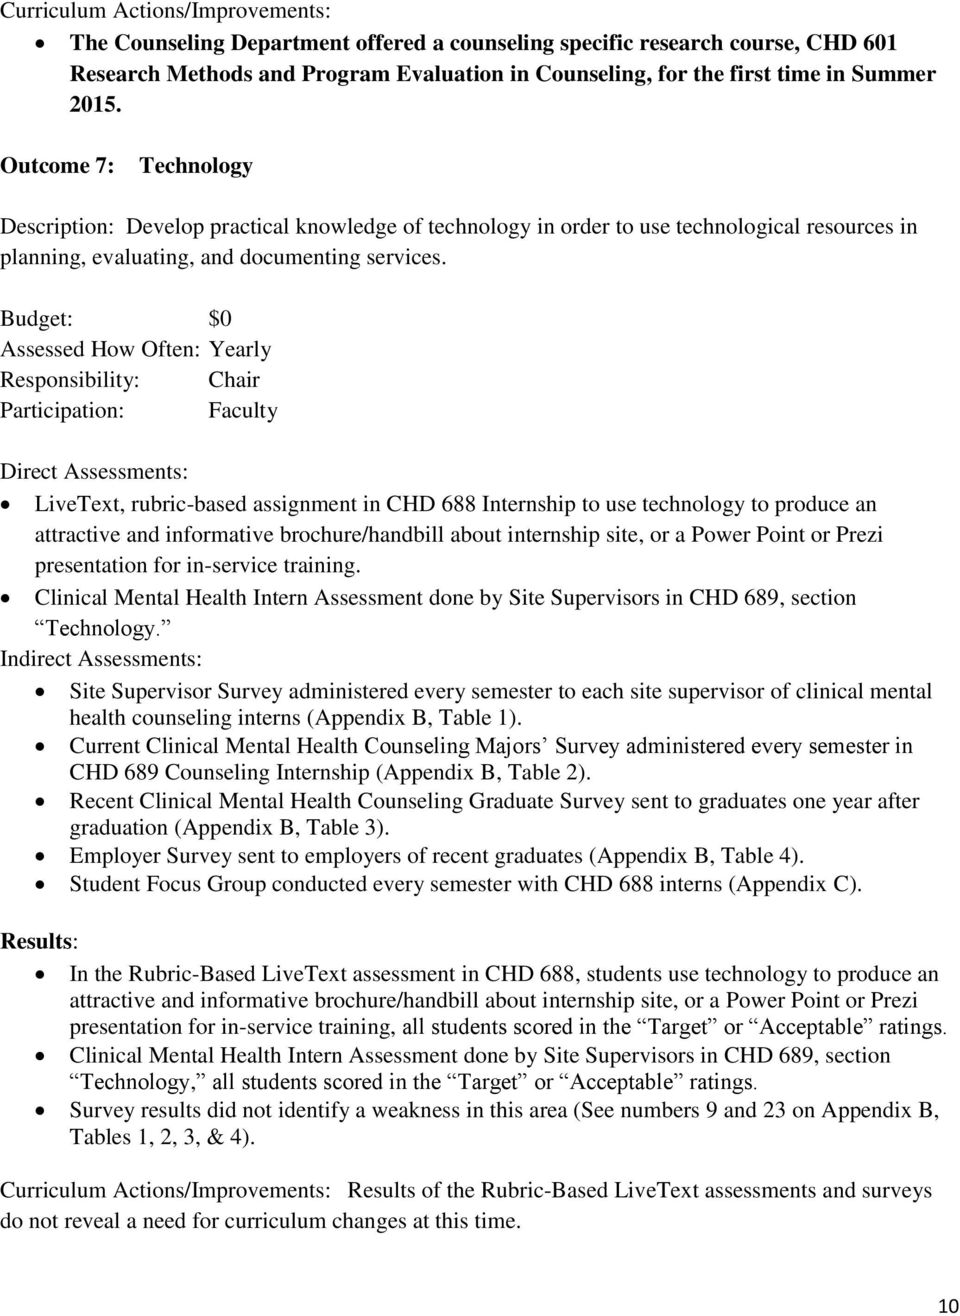 Budget: $0 Assessed How Often: Yearly Responsibility: Chair Participation: Faculty Direct Assessments: LiveText, rubric-based assignment in CHD 688 Internship to use technology to produce an